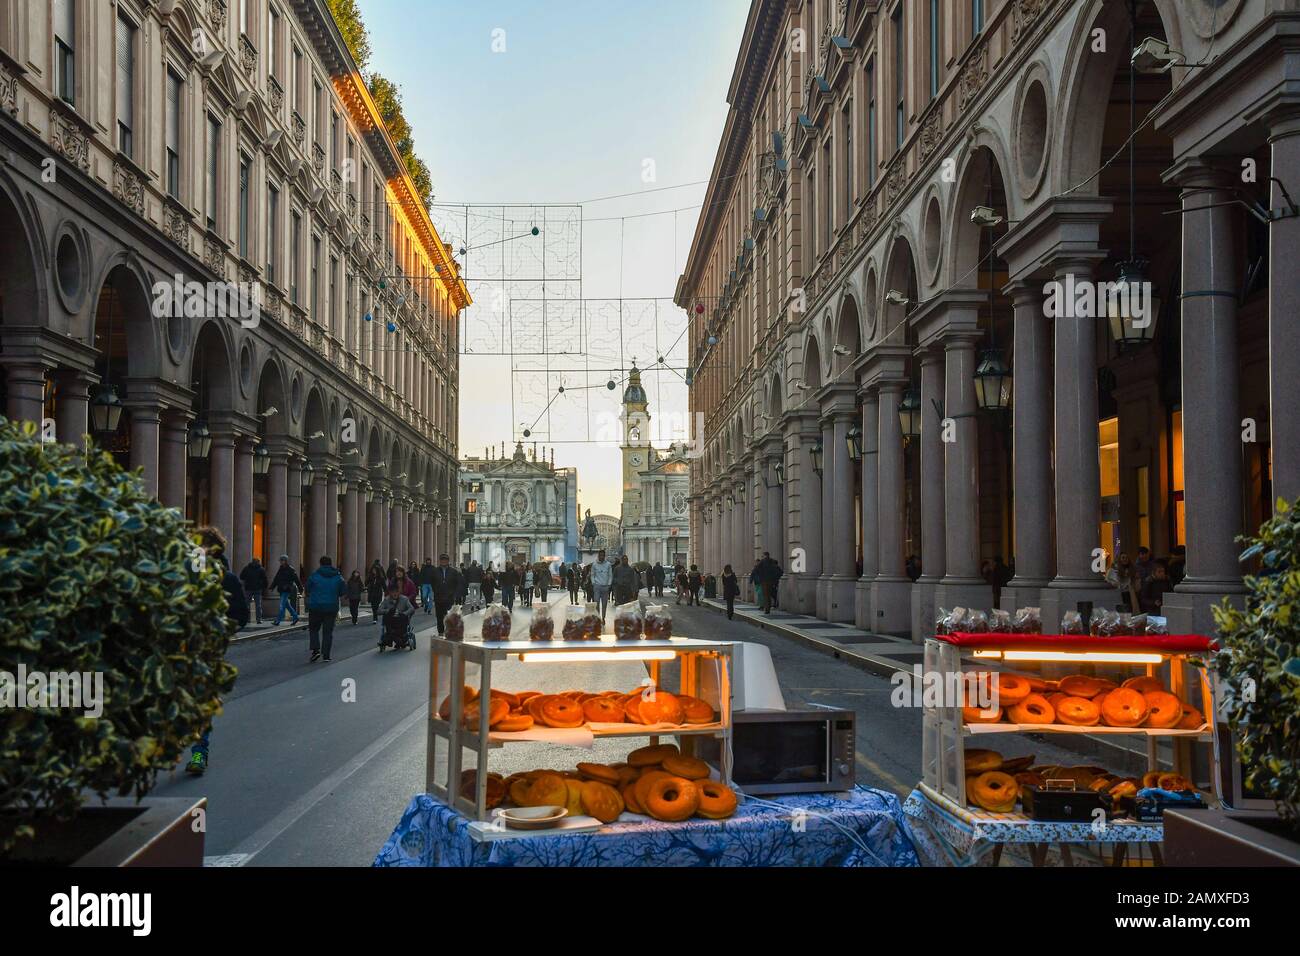 View of the historic centre of Turin with a stand selling donuts in Via Roma street and Piazza San Carlo square on Christmas Eve, Piedmont, Italy Stock Photo